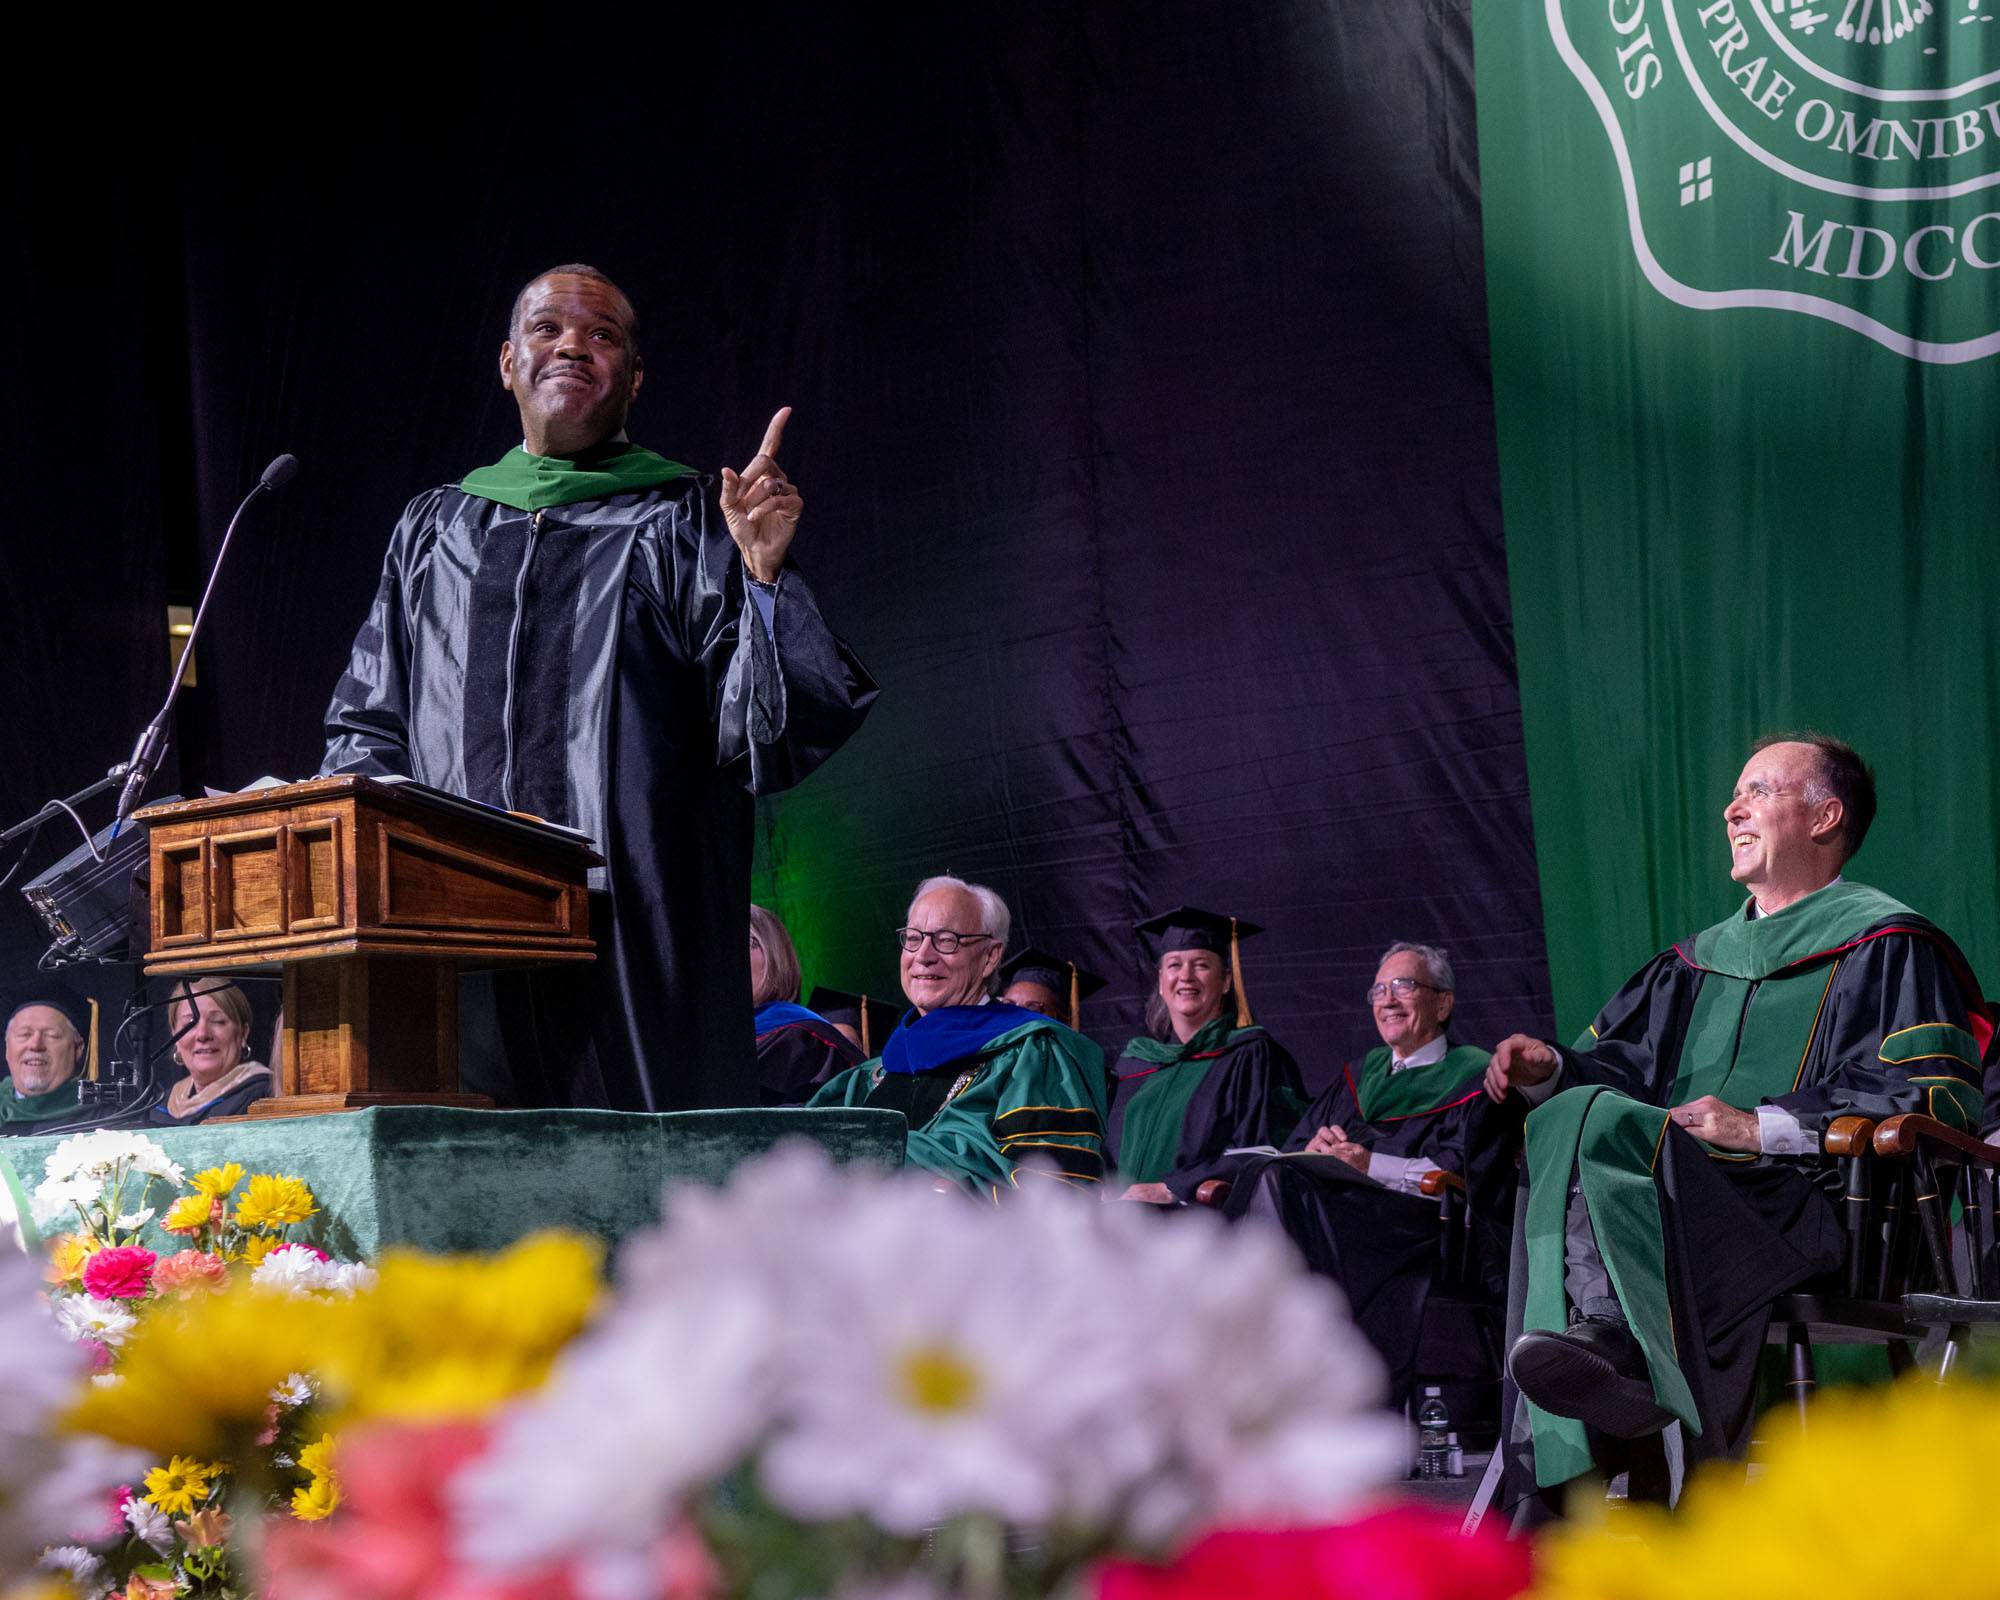 "Every action that you take can influence the lives of others, especially when you have D.O. behind your name. People are going to sit up and take note of the things that you say... Use this position to speak for the voiceless, fight for the helpless, and love the unloveable," Commencement Speaker Tyree Winters, D.O., told the graduates.